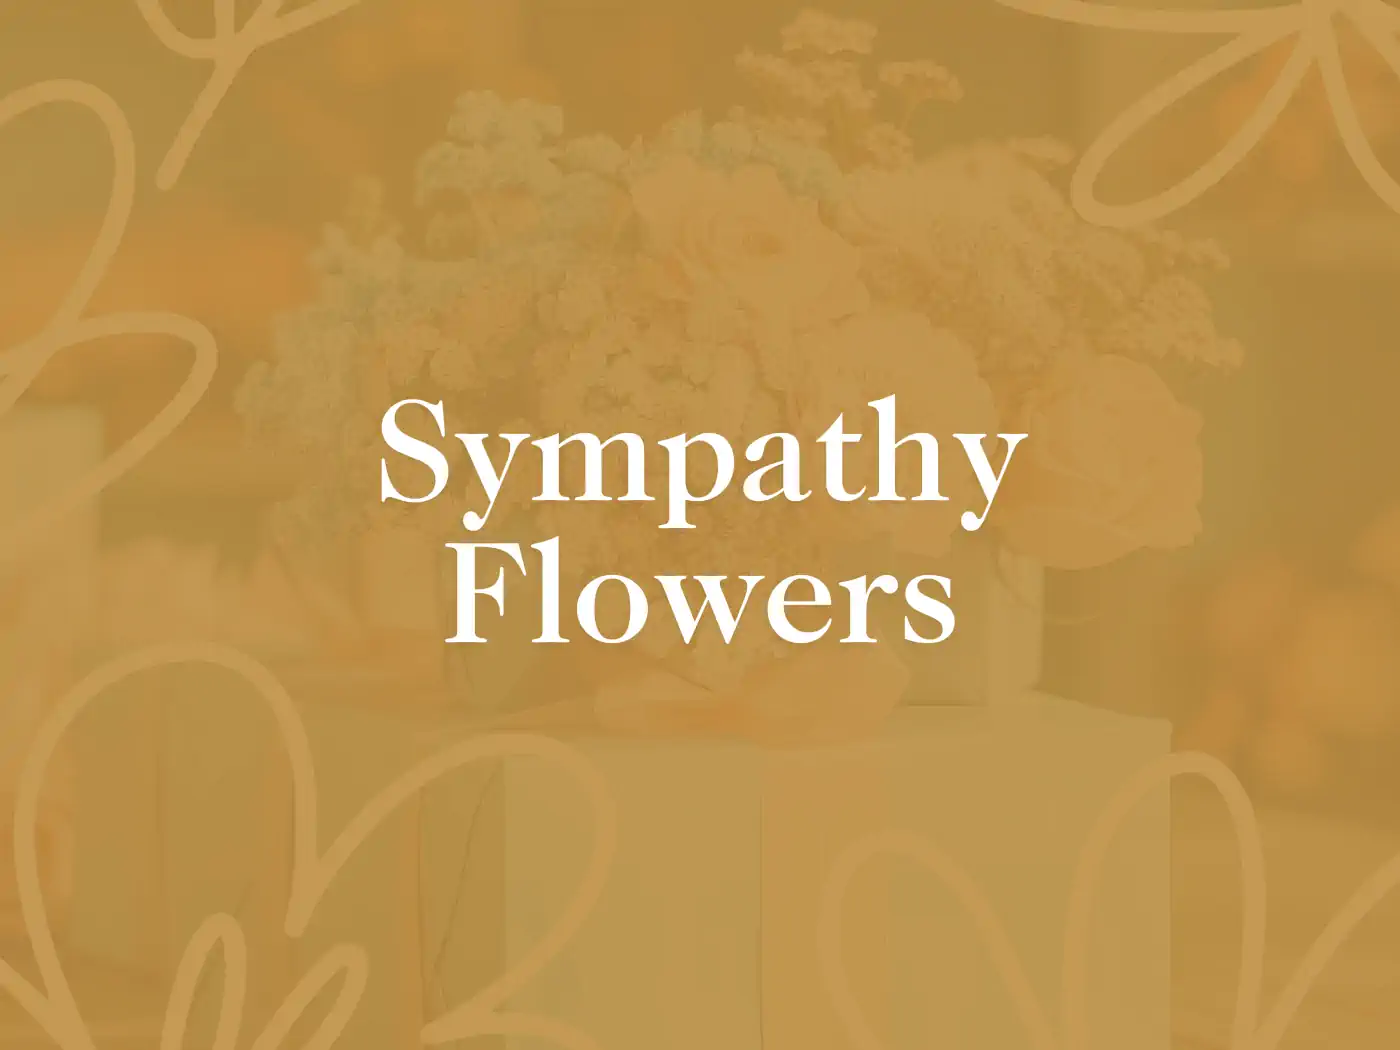 Sympathy Flowers. Text on a background with flowers. Fabulous Flowers and Gifts.